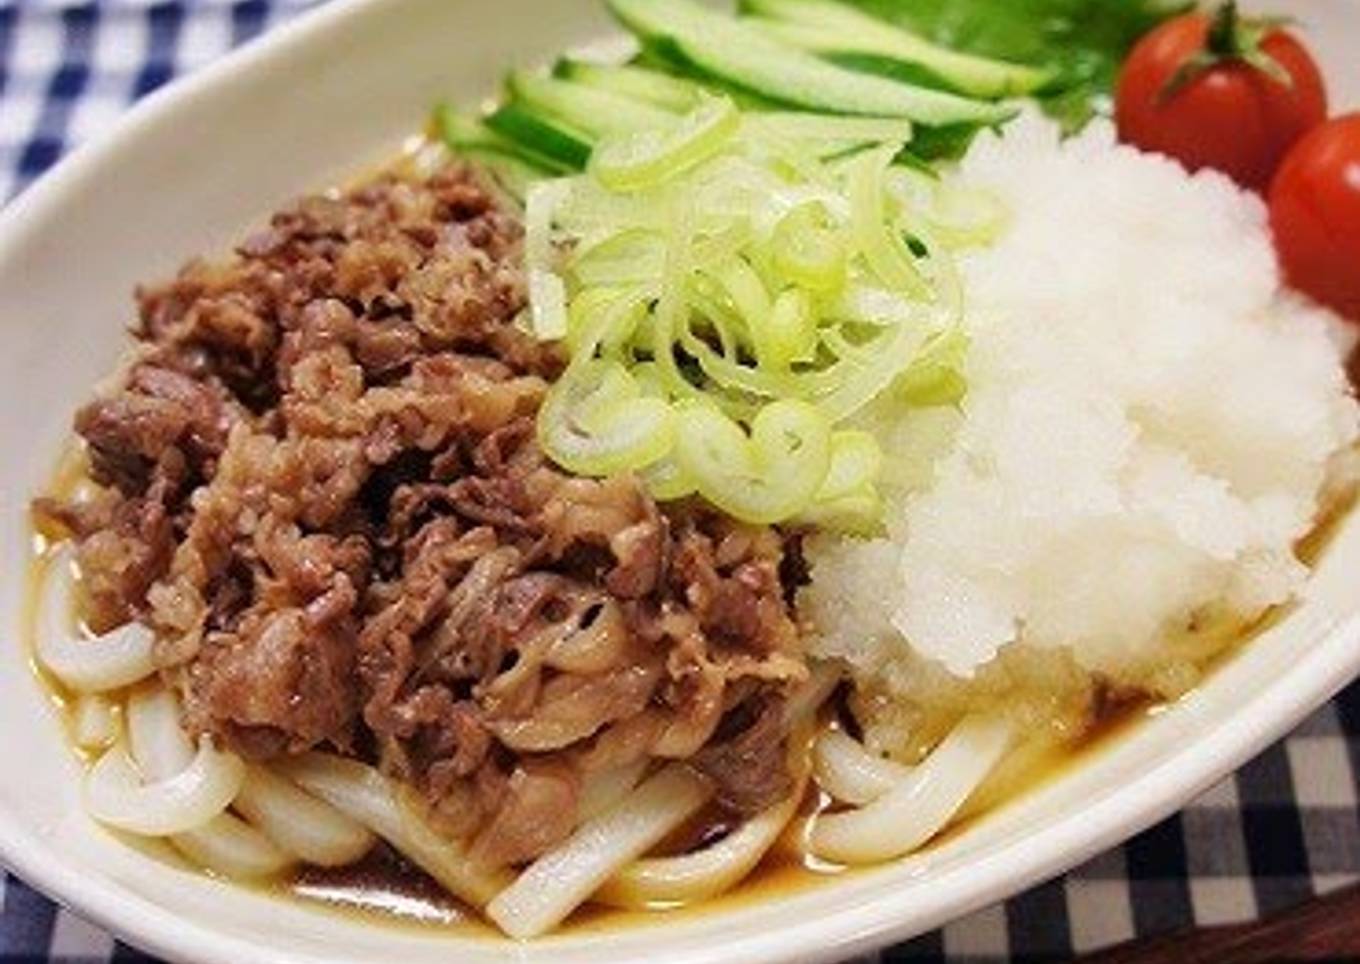 Udon Noodles with Grated Daikon and Beef